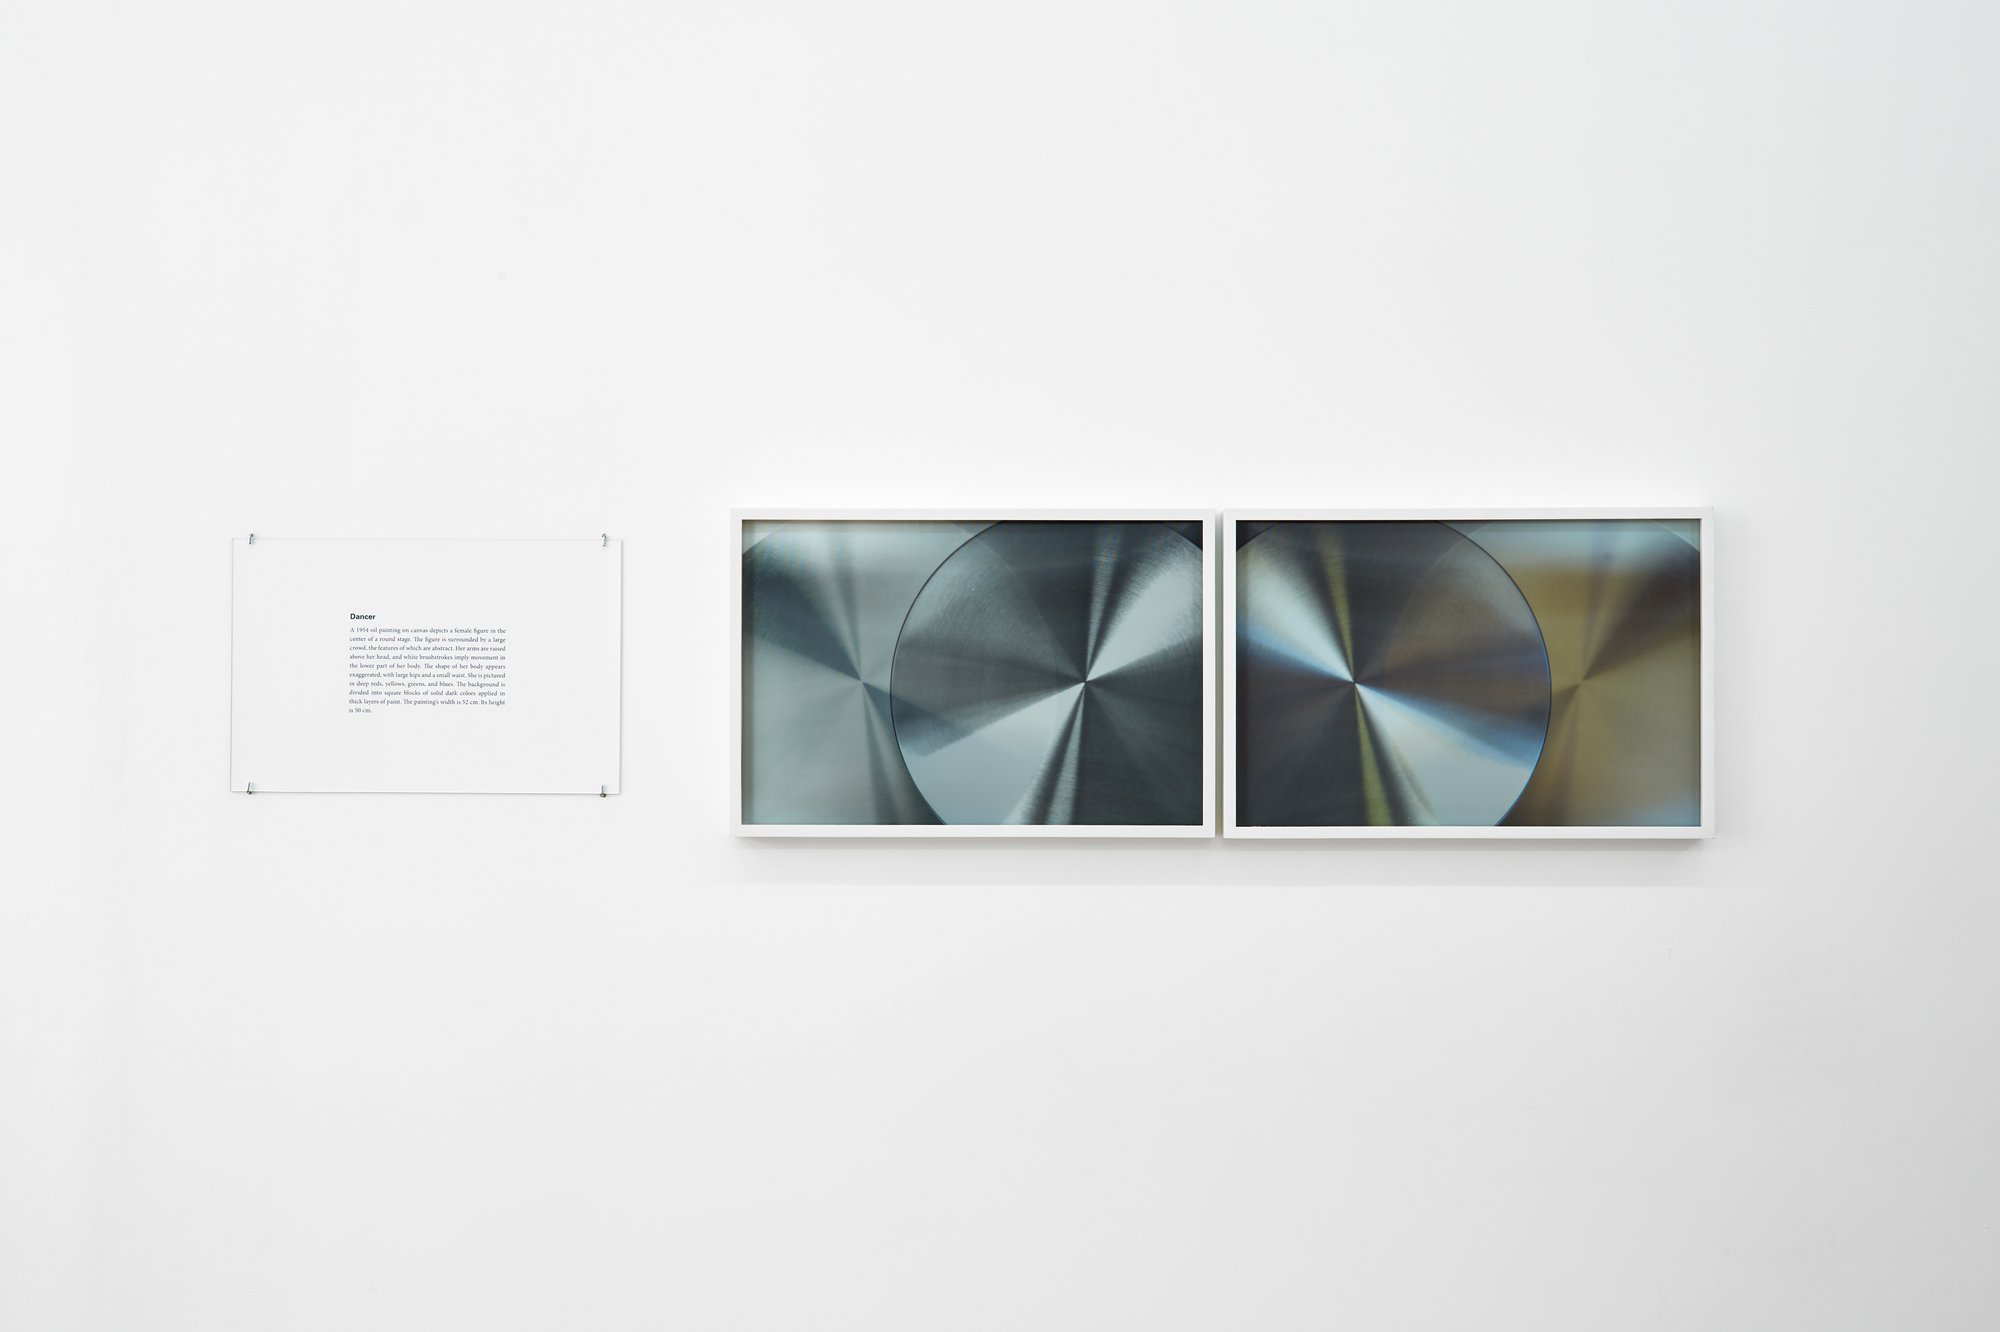 Iman Issa, Dancer (study for 2014), two lenticular prints, text panel under glass, 35.5 x 52.5 cm each (14 x 20 5/8 in each), 2014